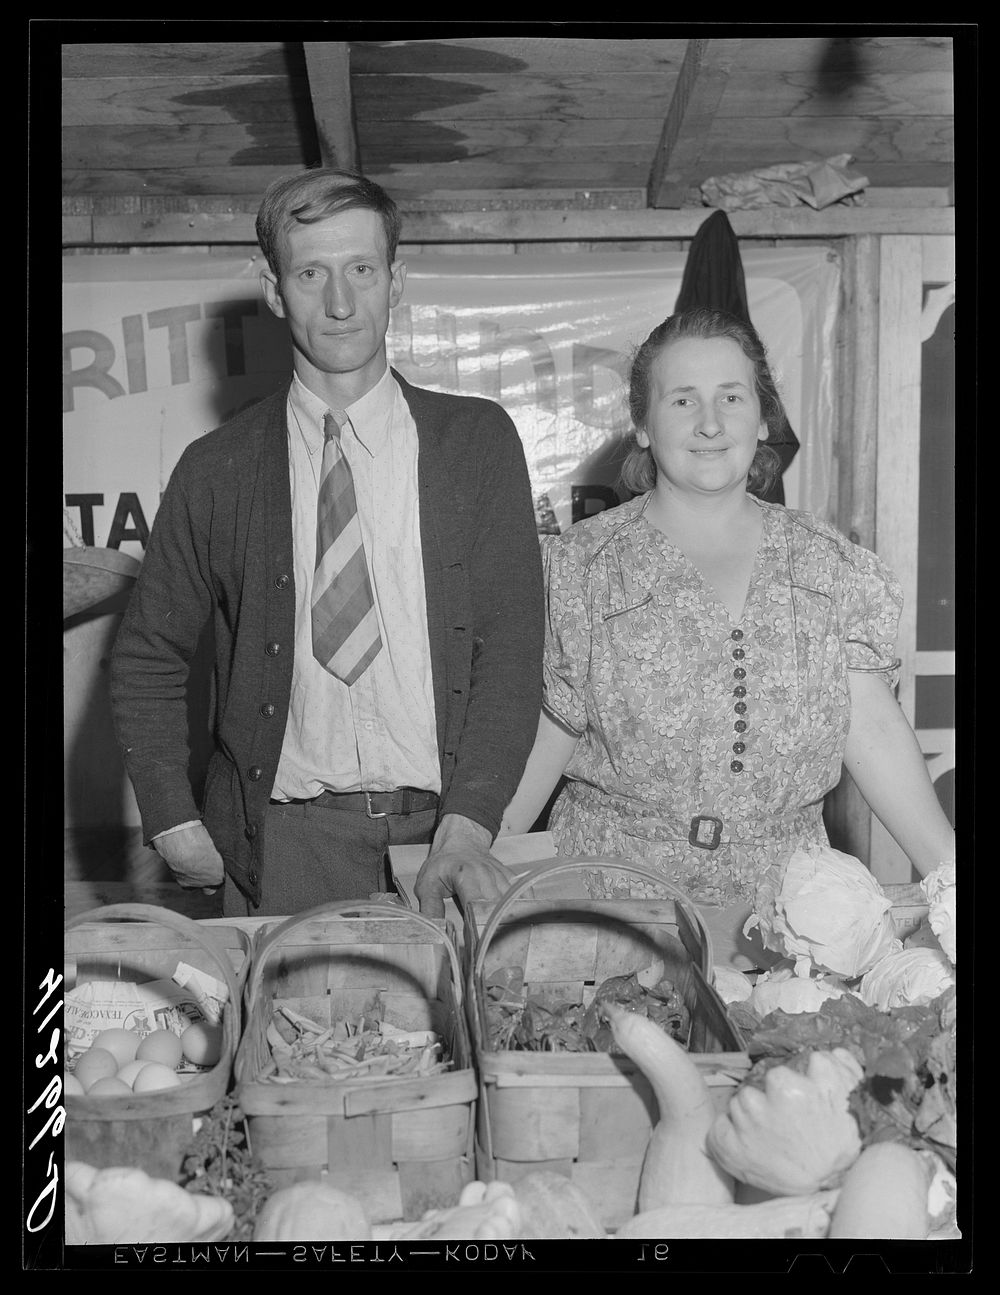 [Untitled photo, possibly related to: Mr. and Mrs. Bundy at their booth at the Tri-County Farmers Co-op Market at Du Bois…